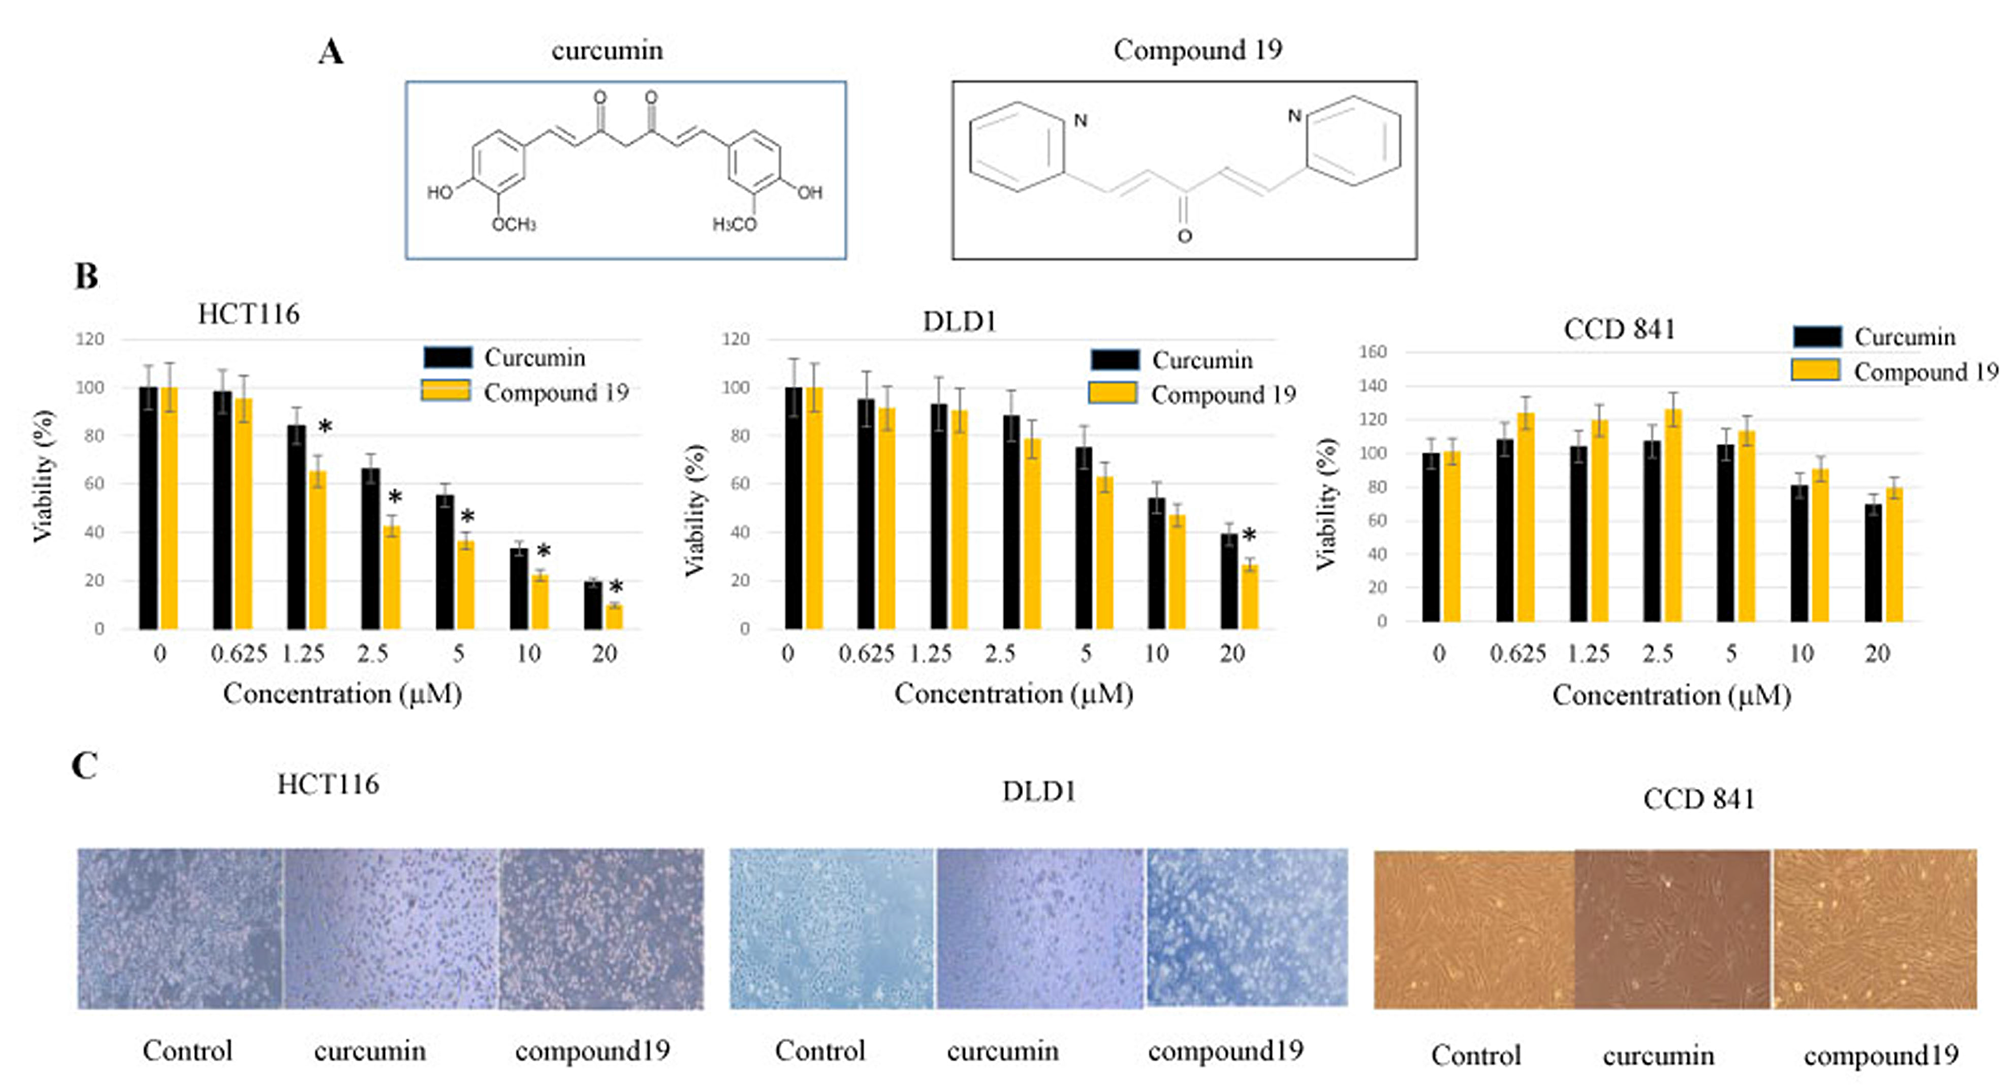 Anti-proliferative effects of curcumin and compound 19 on the human colorectal cancer cell lines HCT116 and DLD1.